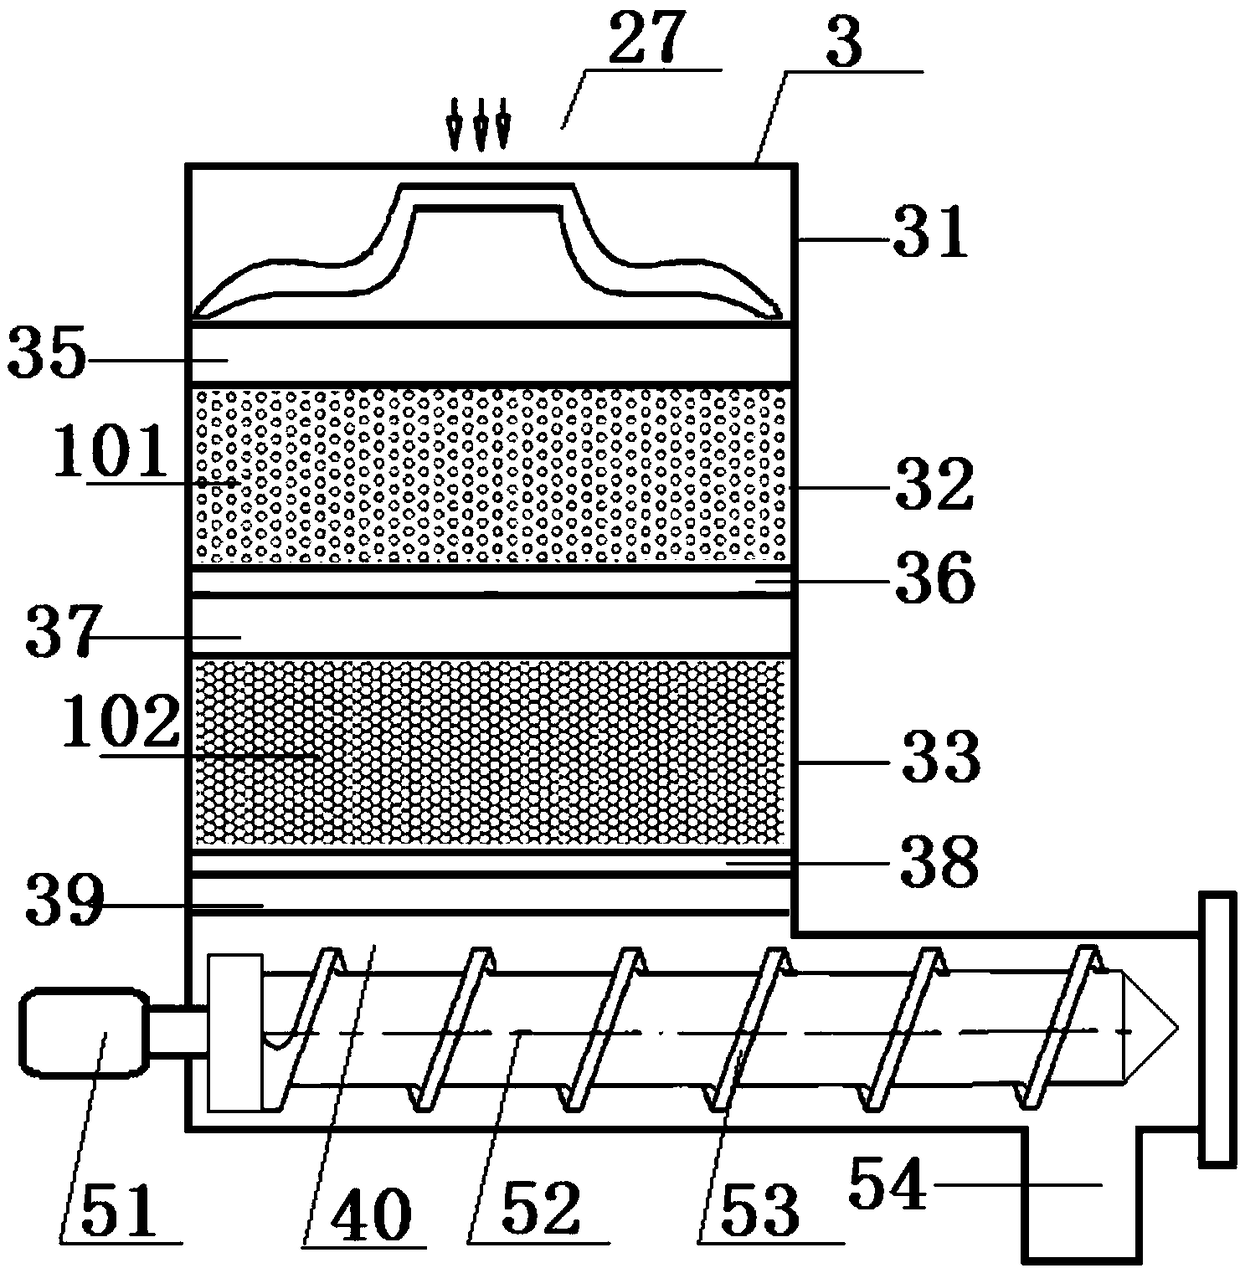 Method for preparing fibers by adding reclaimed materials of waste nonwoven fabric